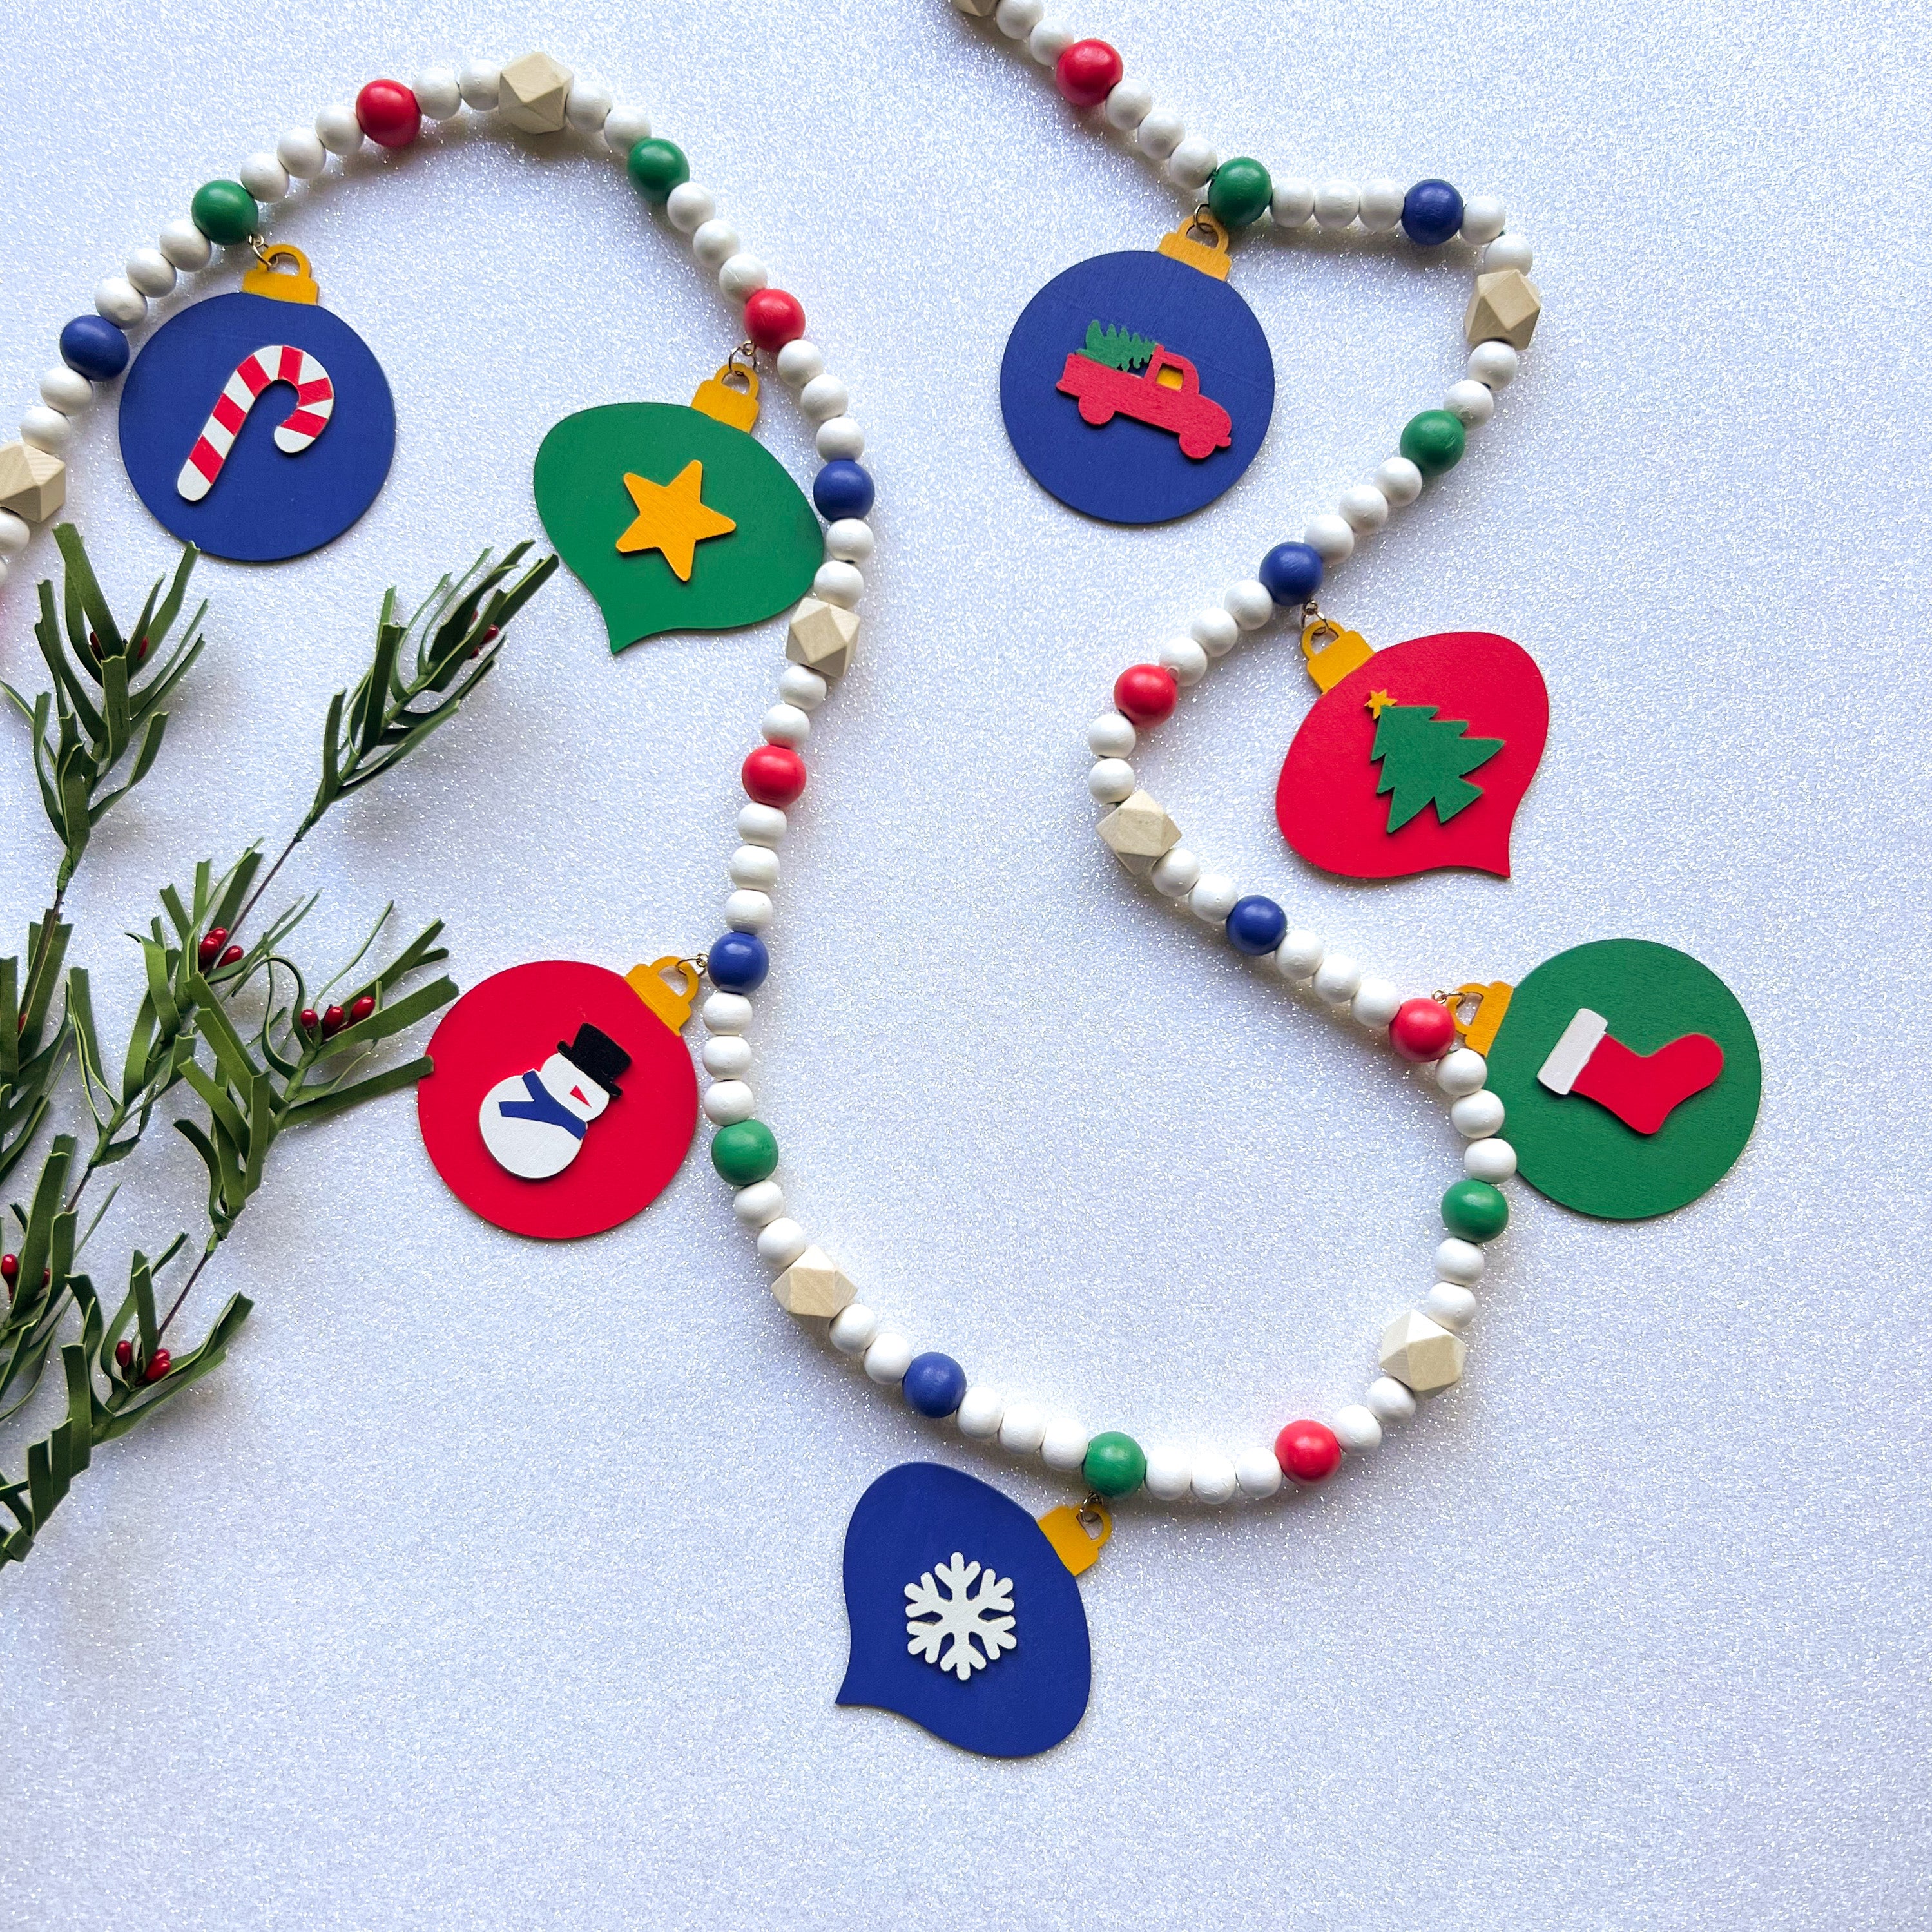 Christmas themed wood bead garland with 7 flat wood ornaments hanging from wood beads. Ornaments feature different holiday shapes. Colors in beads and ornaments are green, blue, red, white, and yellow. Garland is on a white glitter background.